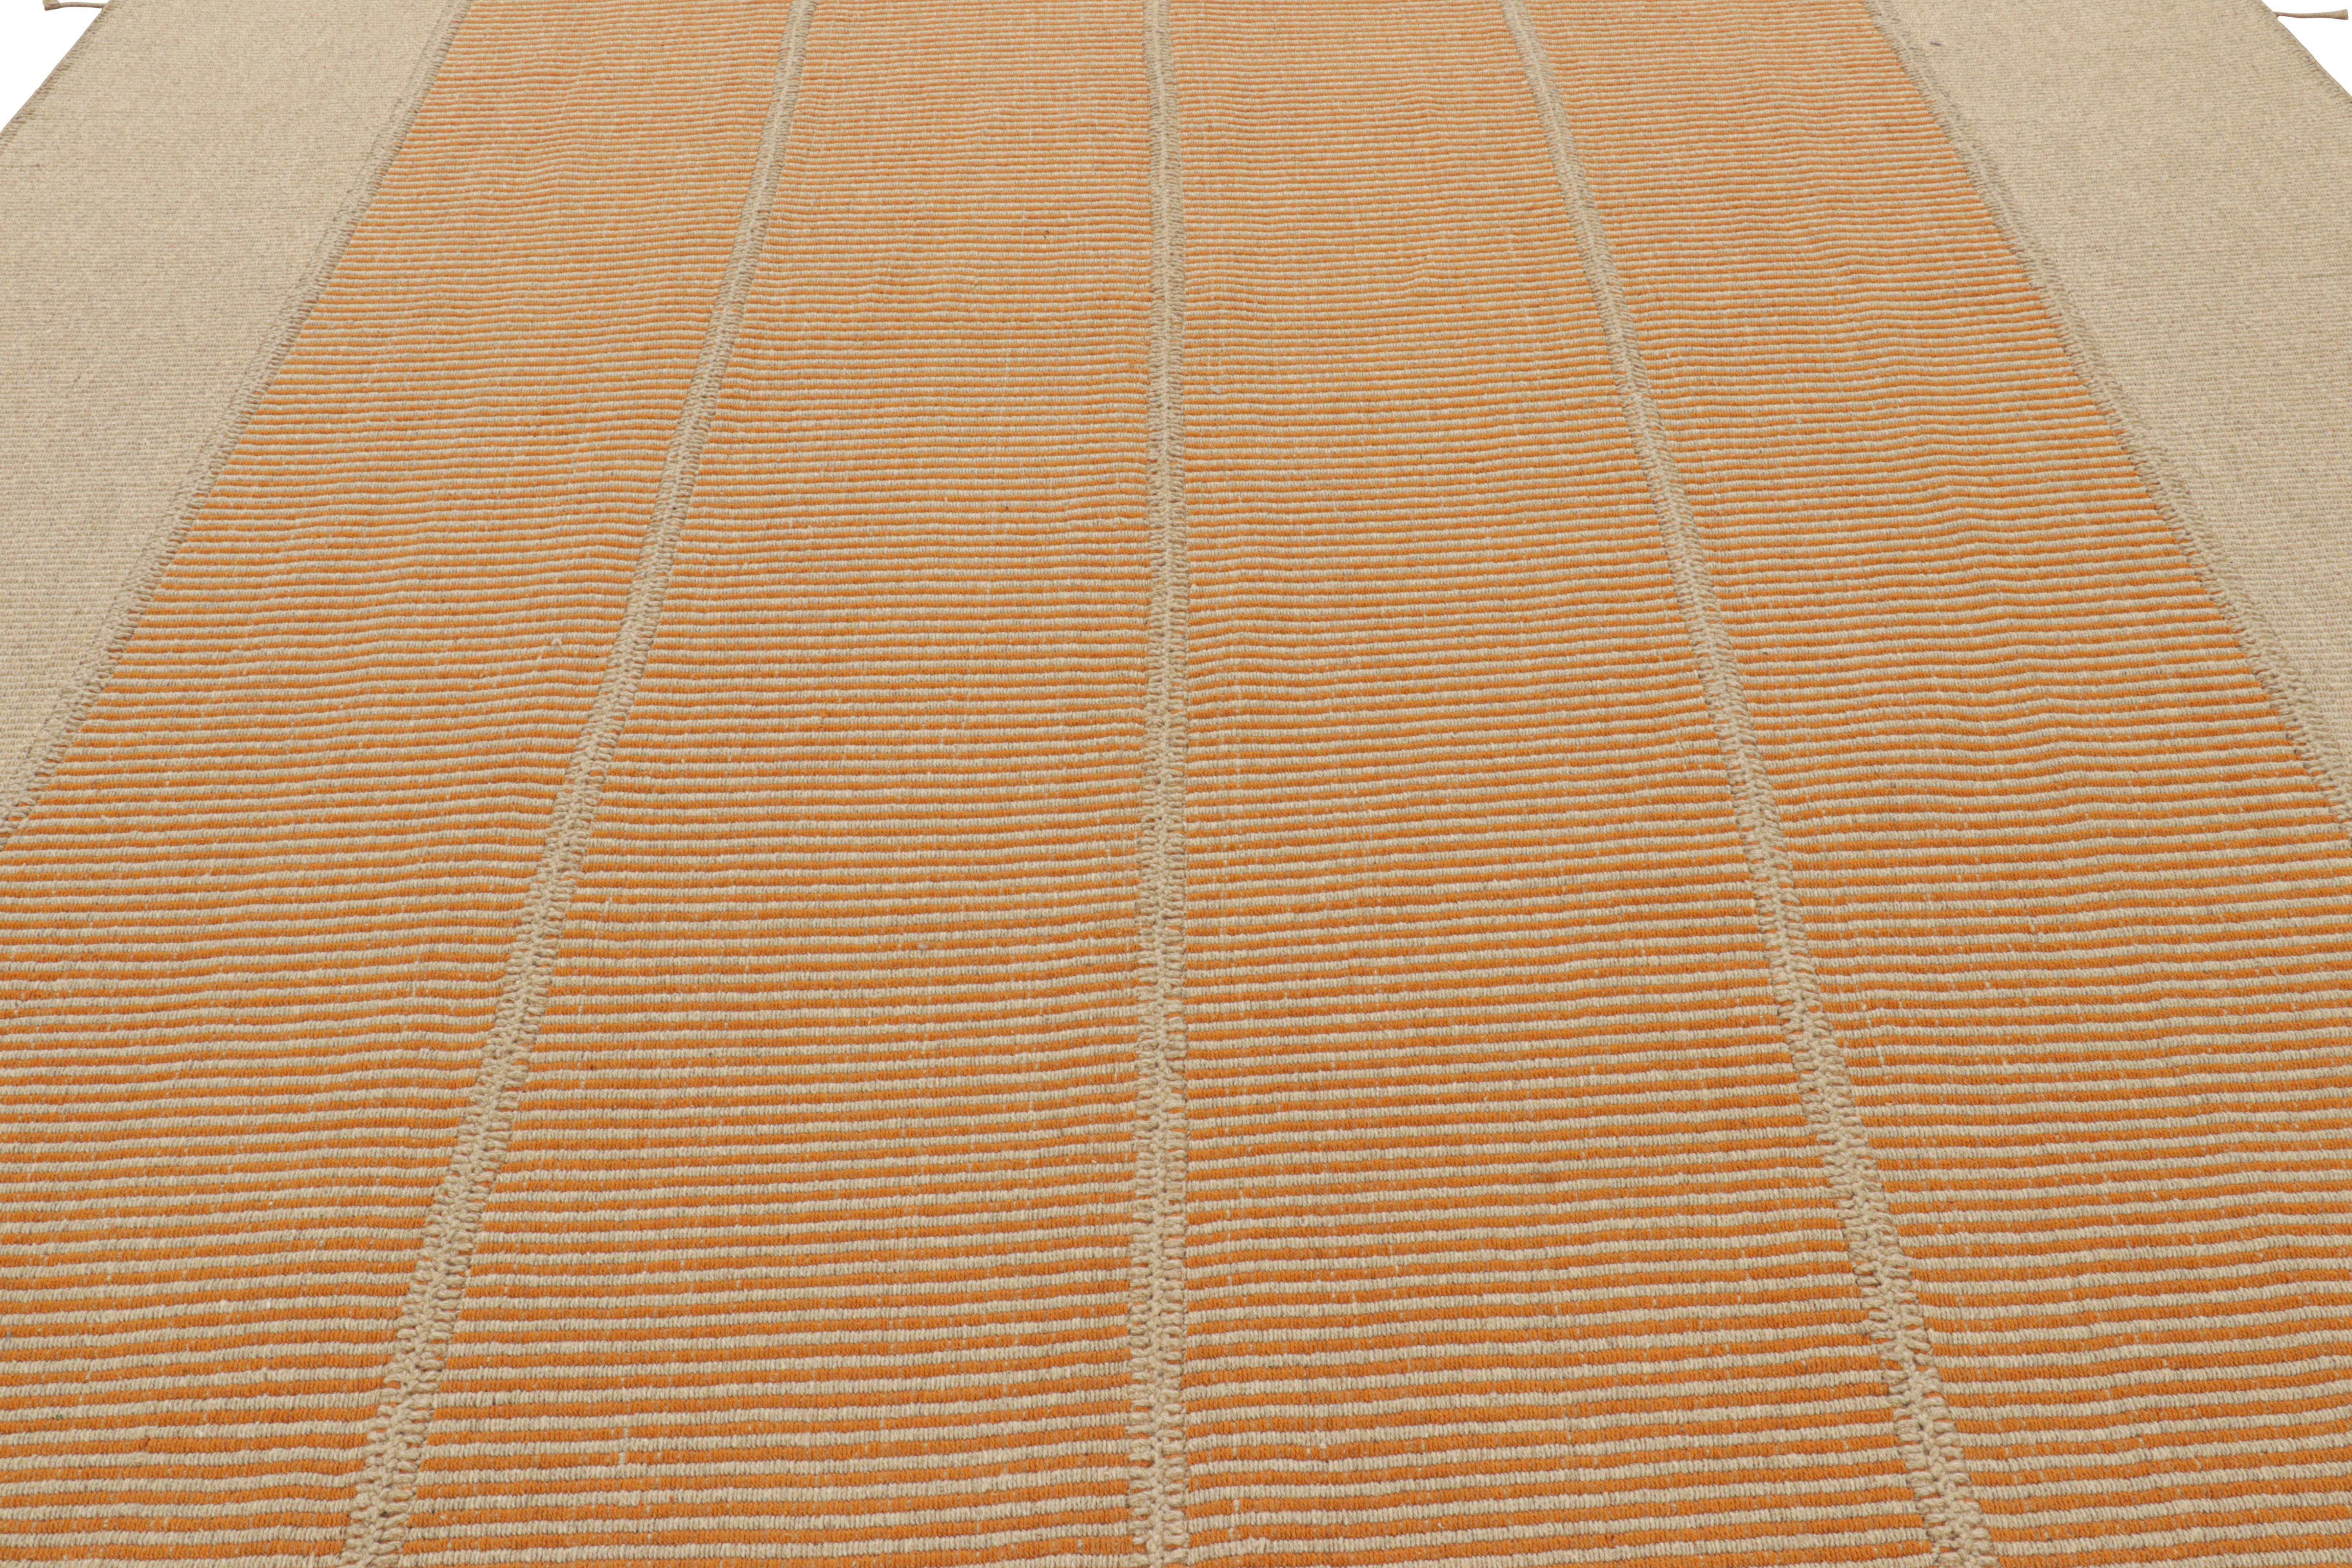 Hand-Woven Rug & Kilim’s Contemporary Kilim in Orange and Beige Textural Stripes For Sale